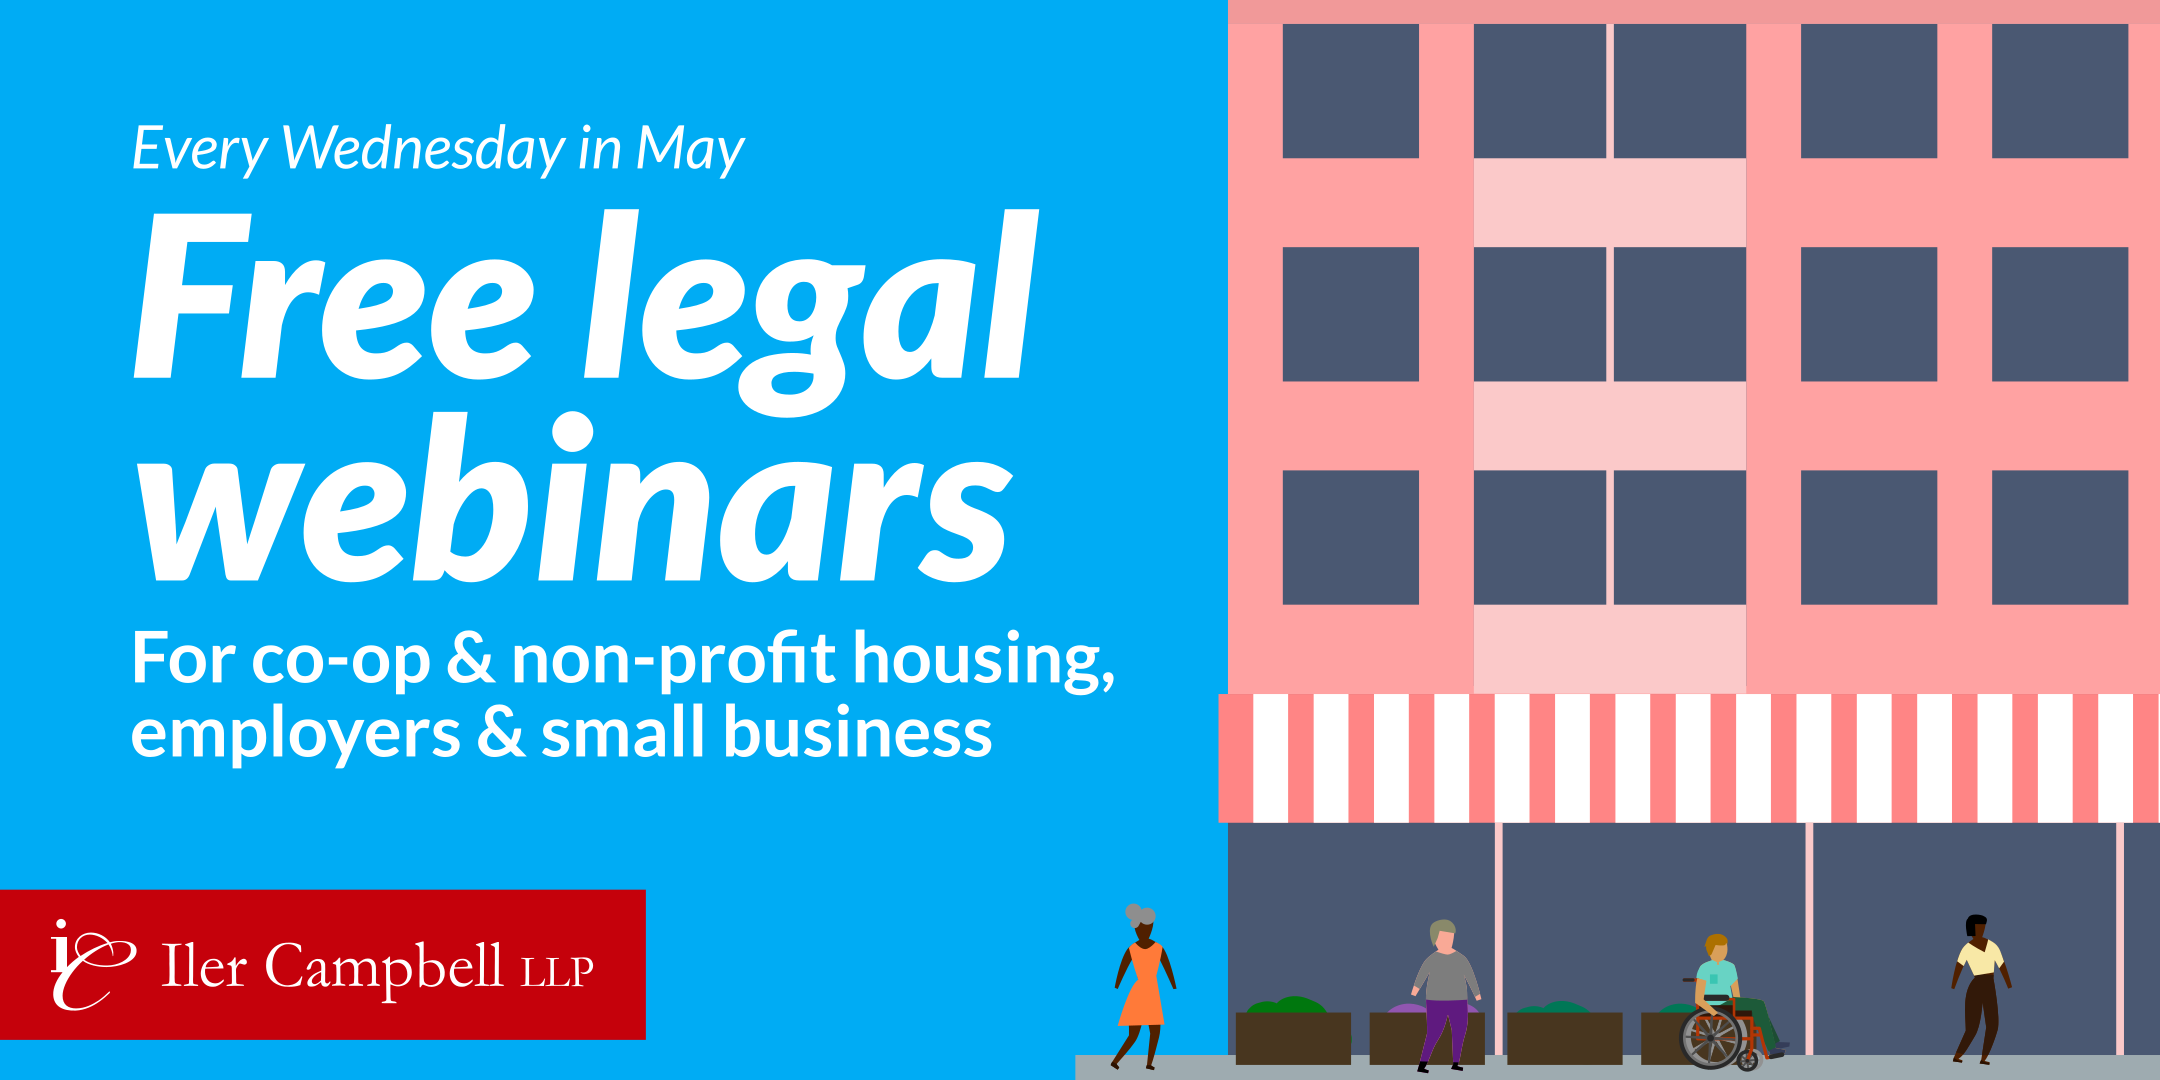 Every Wednesday in May: Free legal webinars for co-op & non-profit housing, employers and small business.